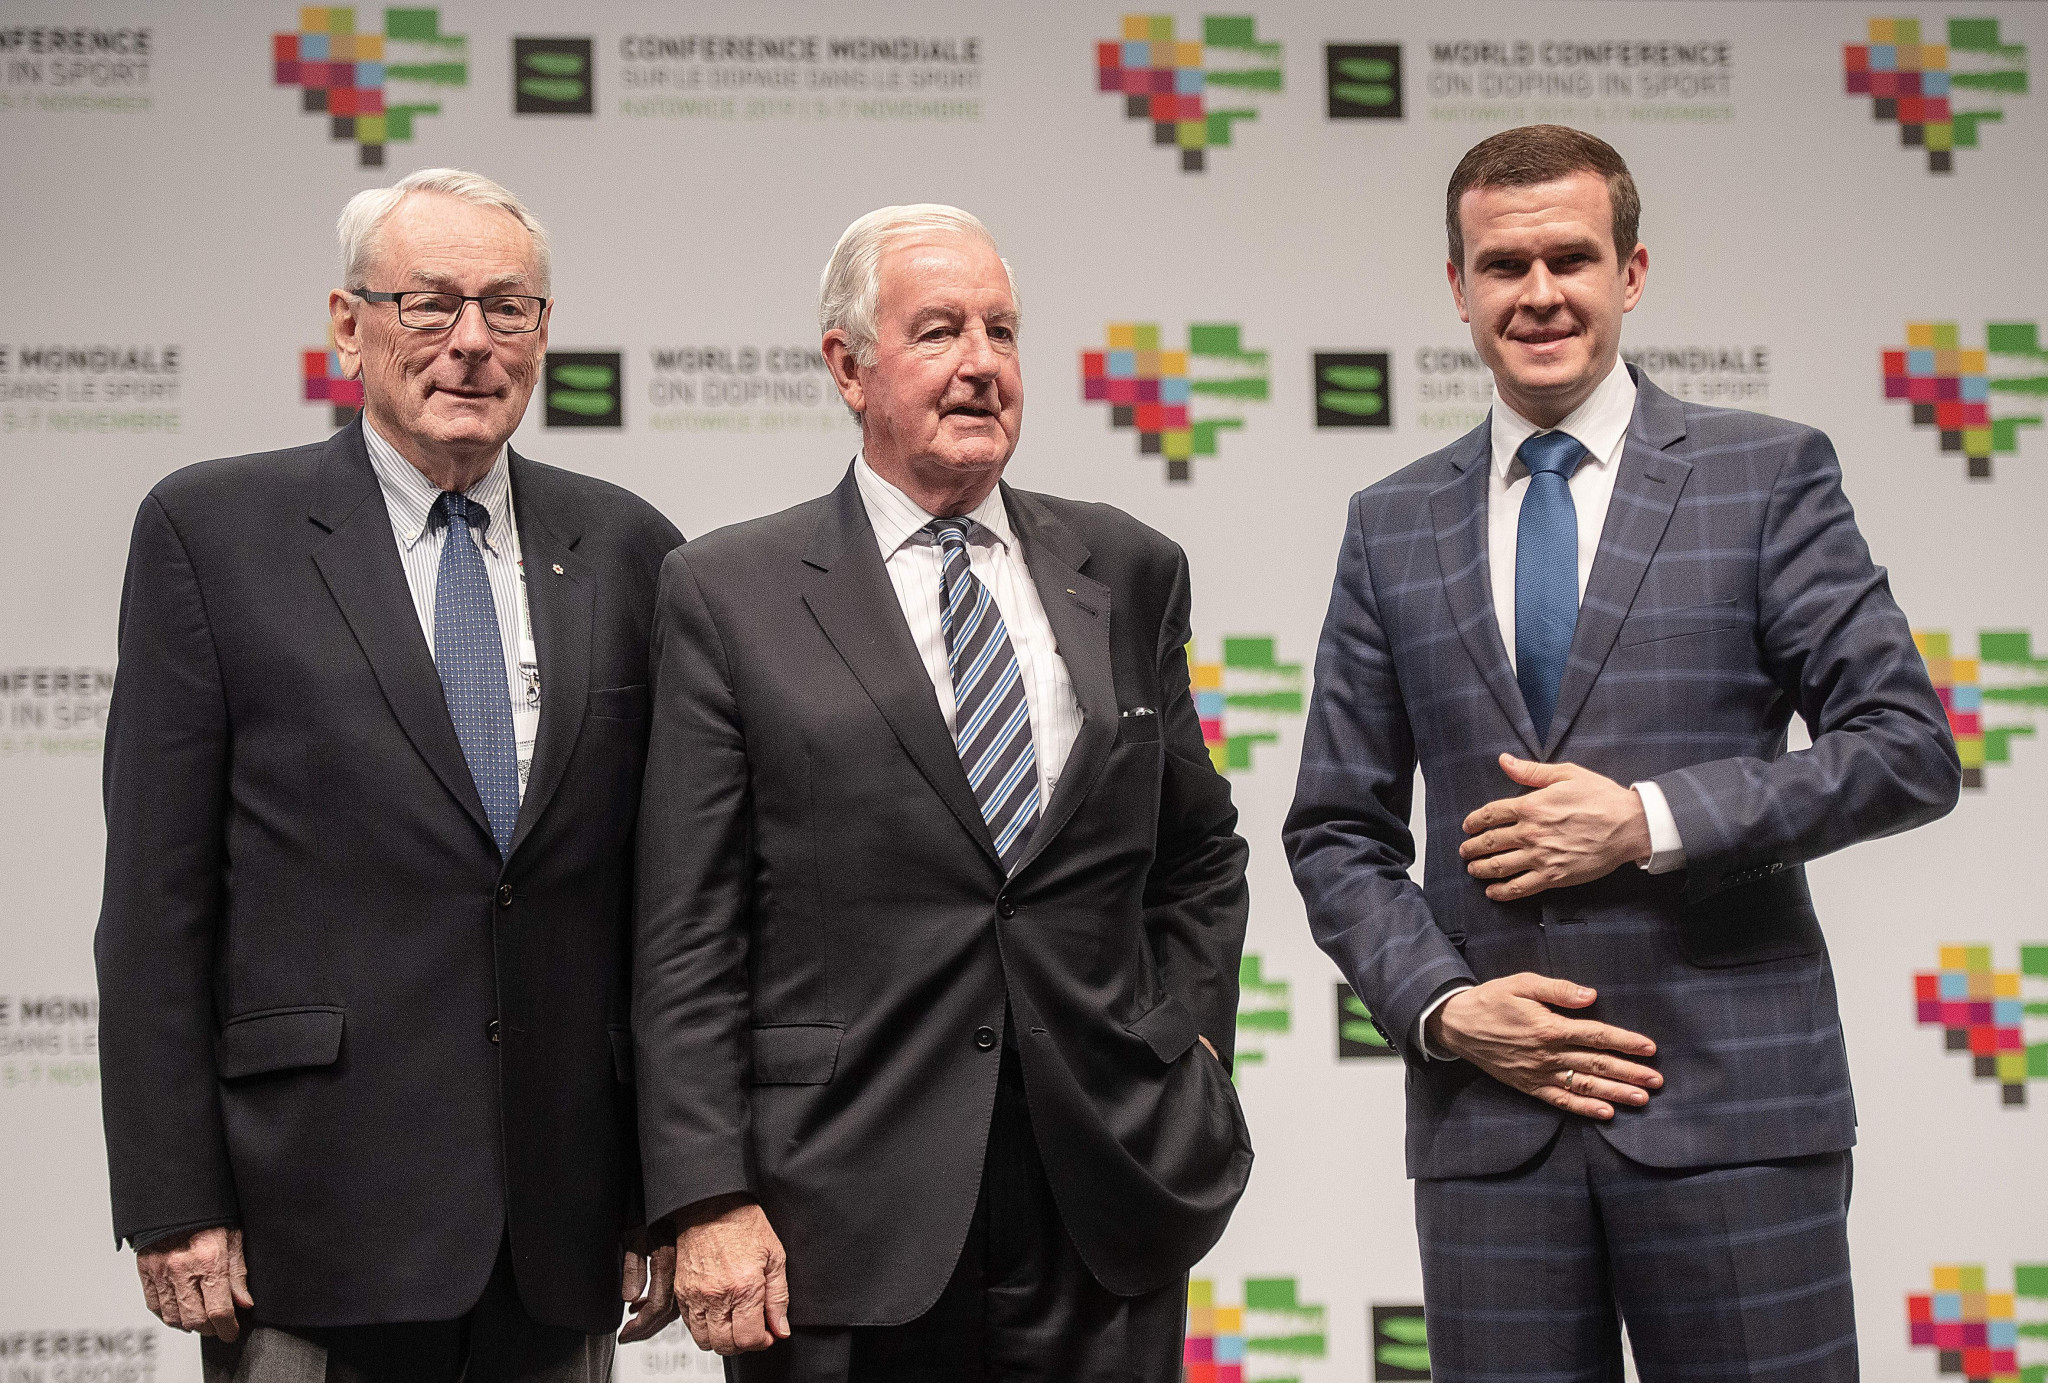 Richard Pound, the founding President of WADA, with Sir Craig Reedie and Witold Bańka, the current and next leaders, in Katowice ©WADA